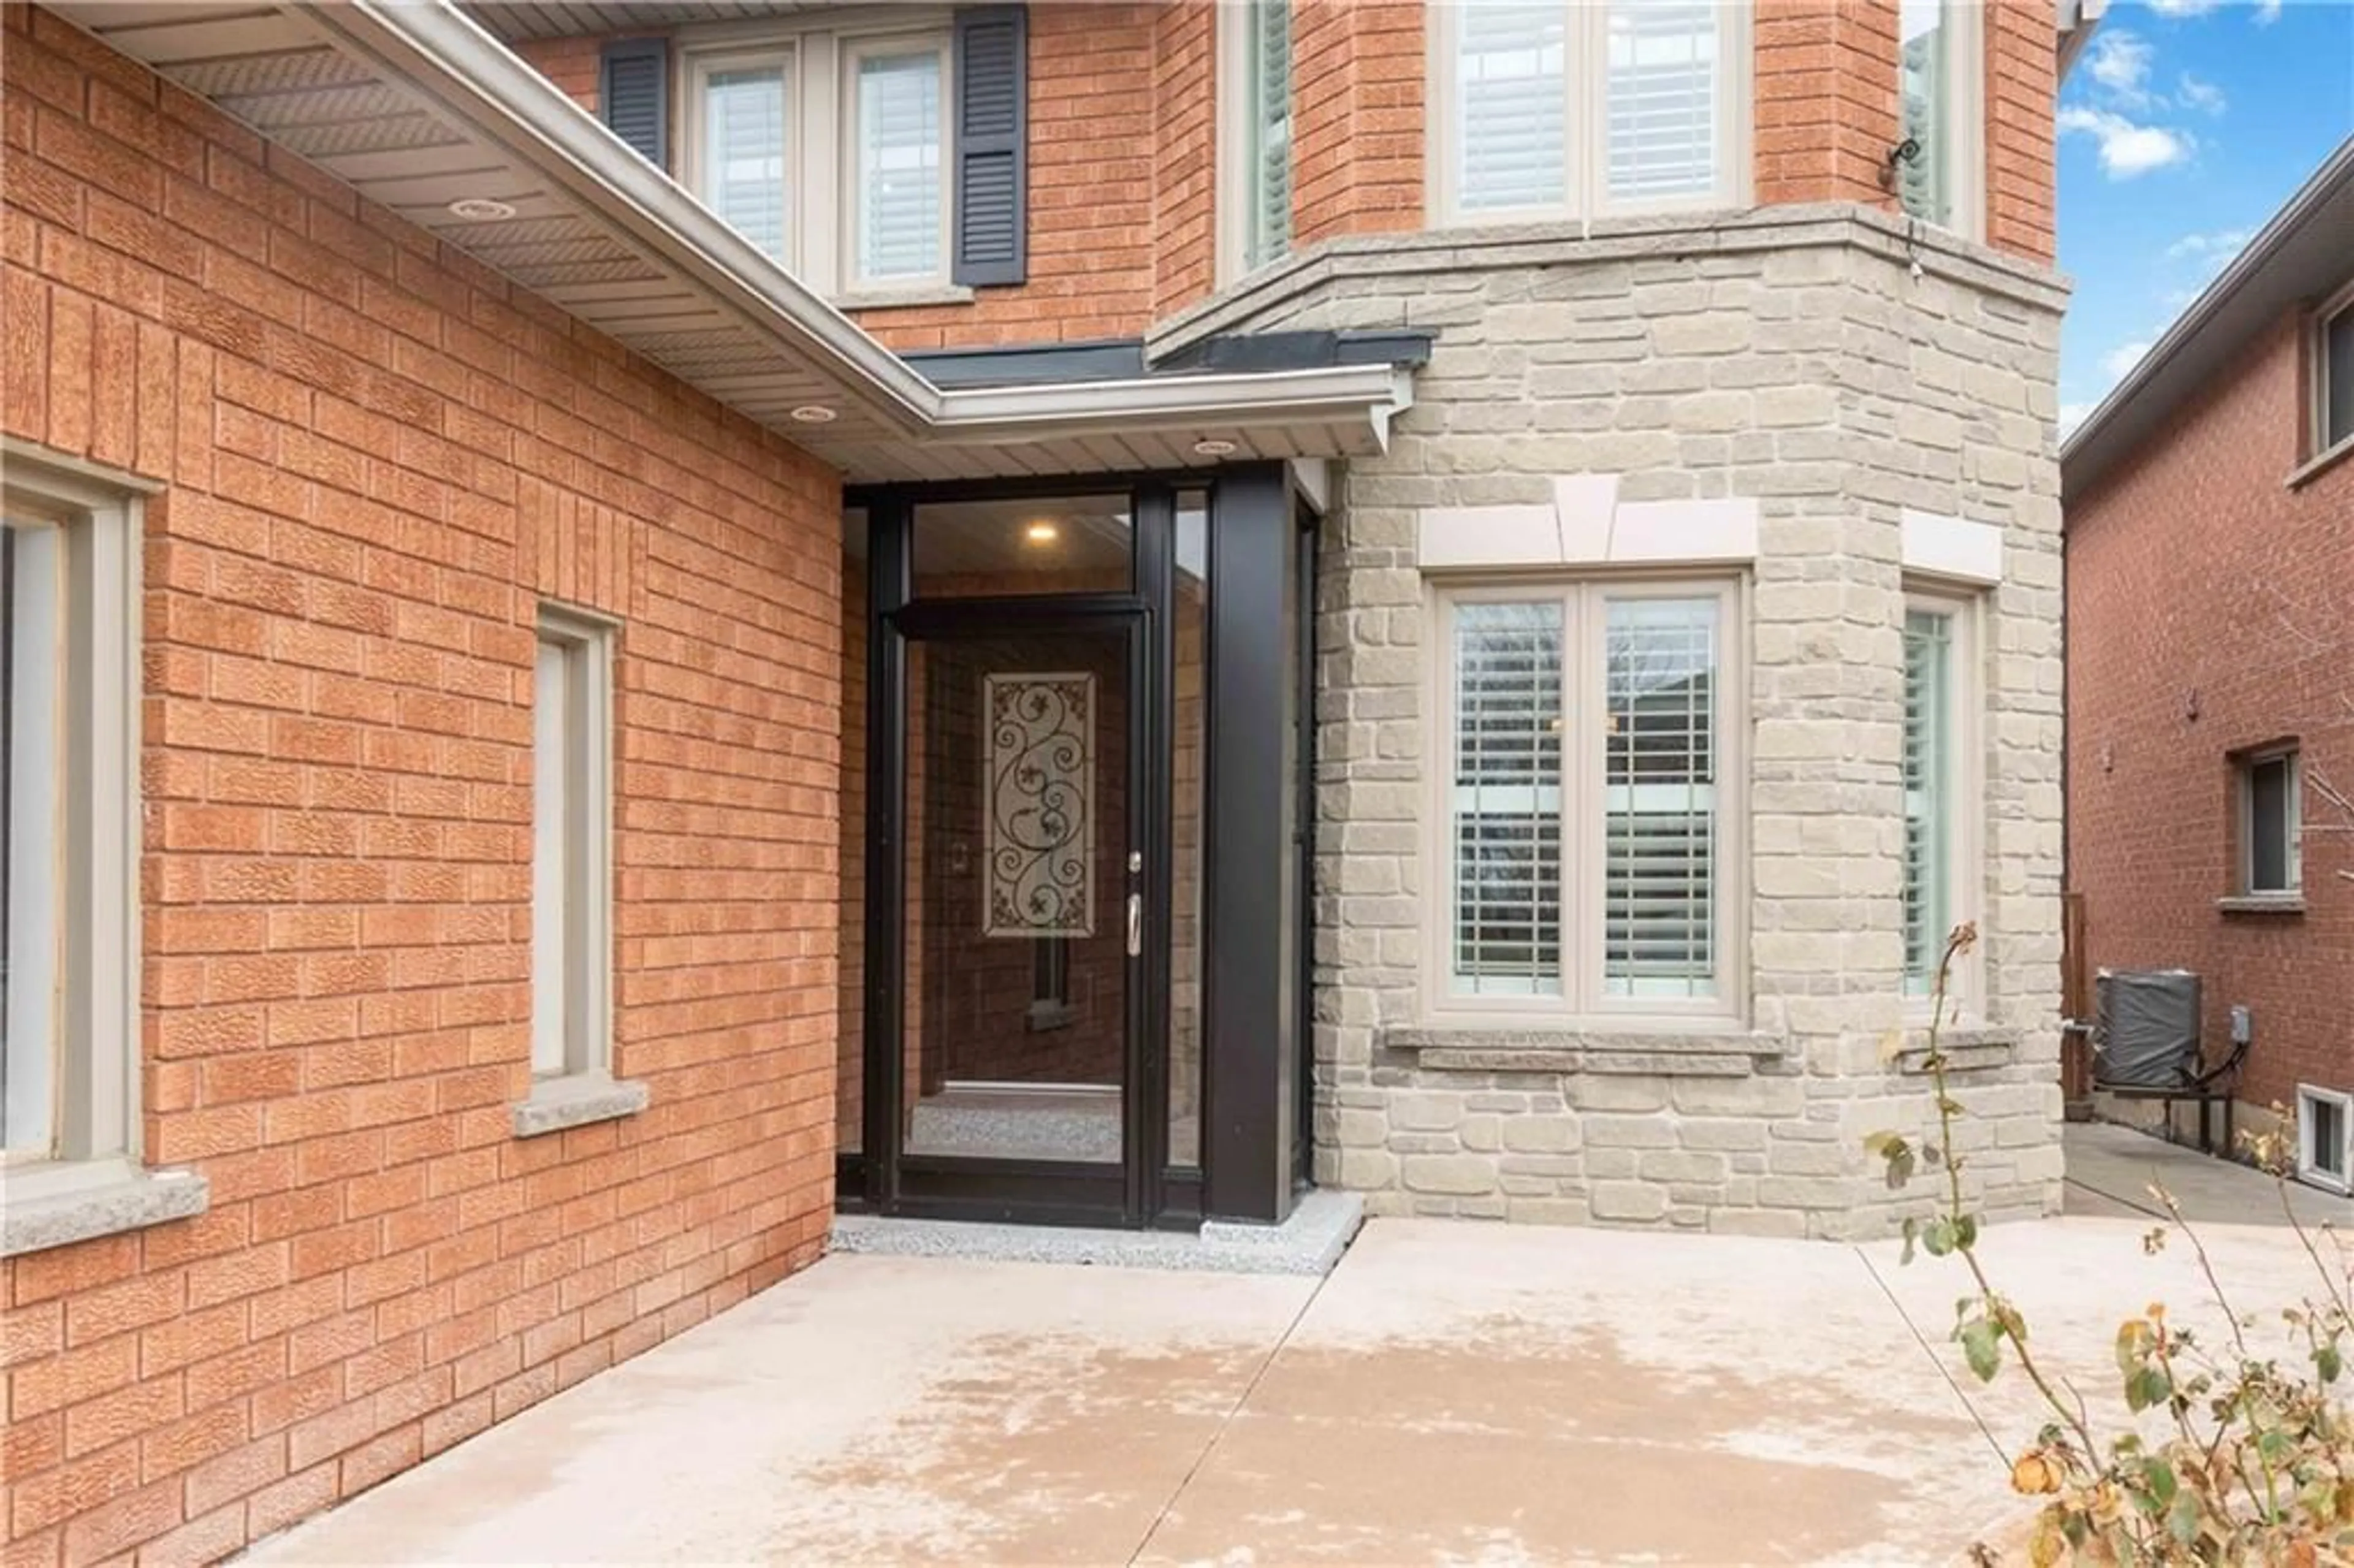 Home with brick exterior material for 31 Topbank Dr, Toronto Ontario M9W 7B8